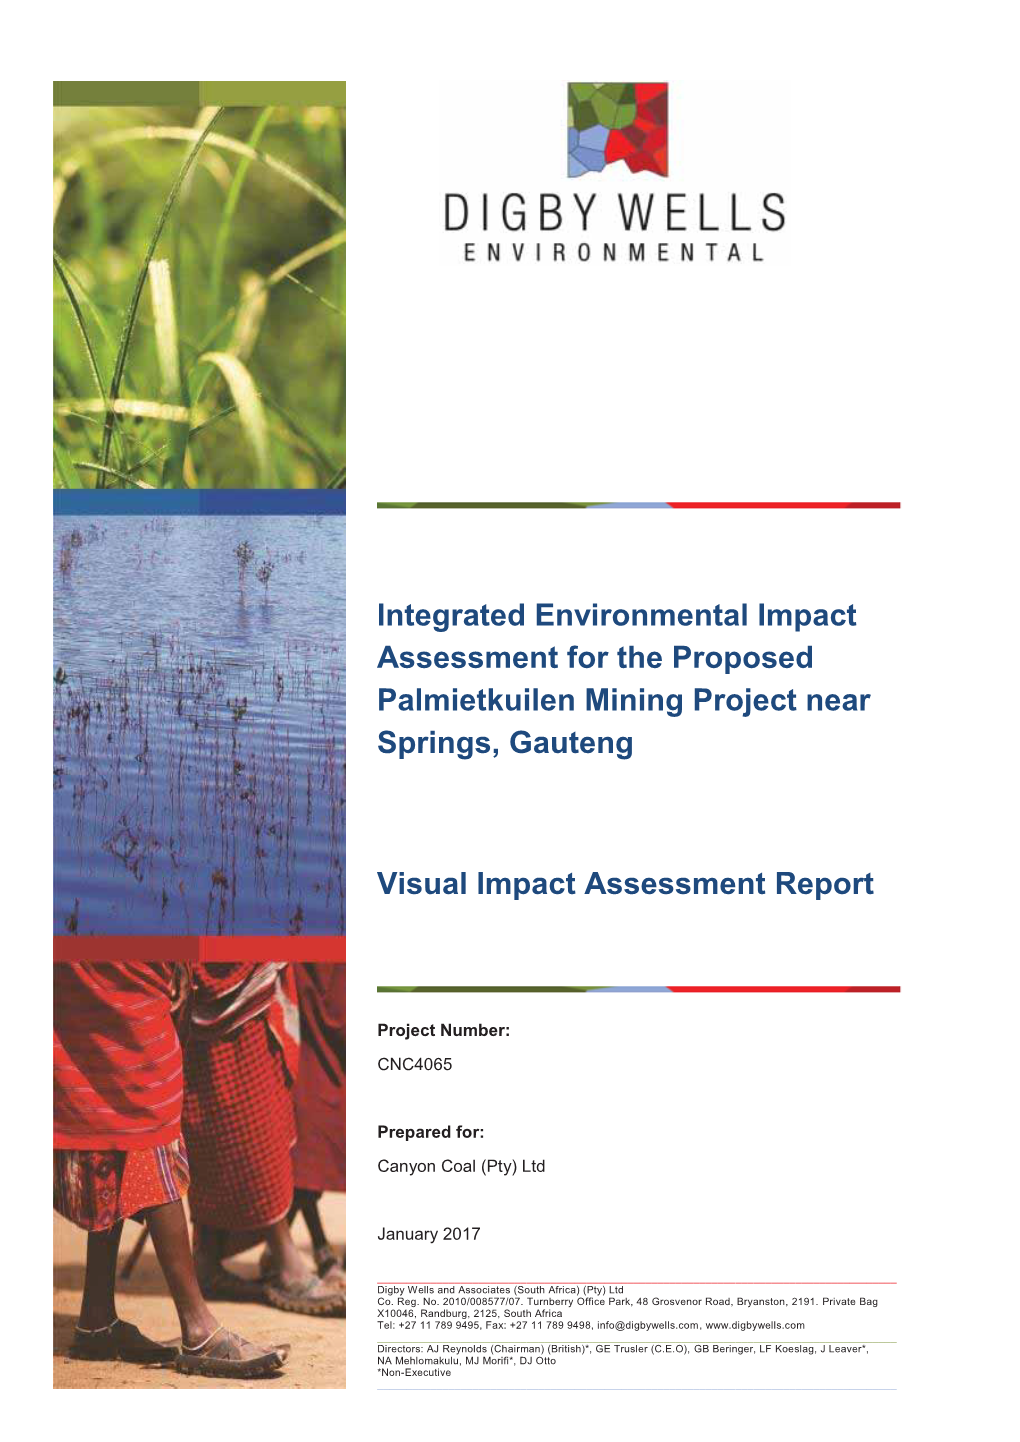 Integrated Environmental Impact Assessment for the Proposed Palmietkuilen Mining Project Near Springs, Gauteng